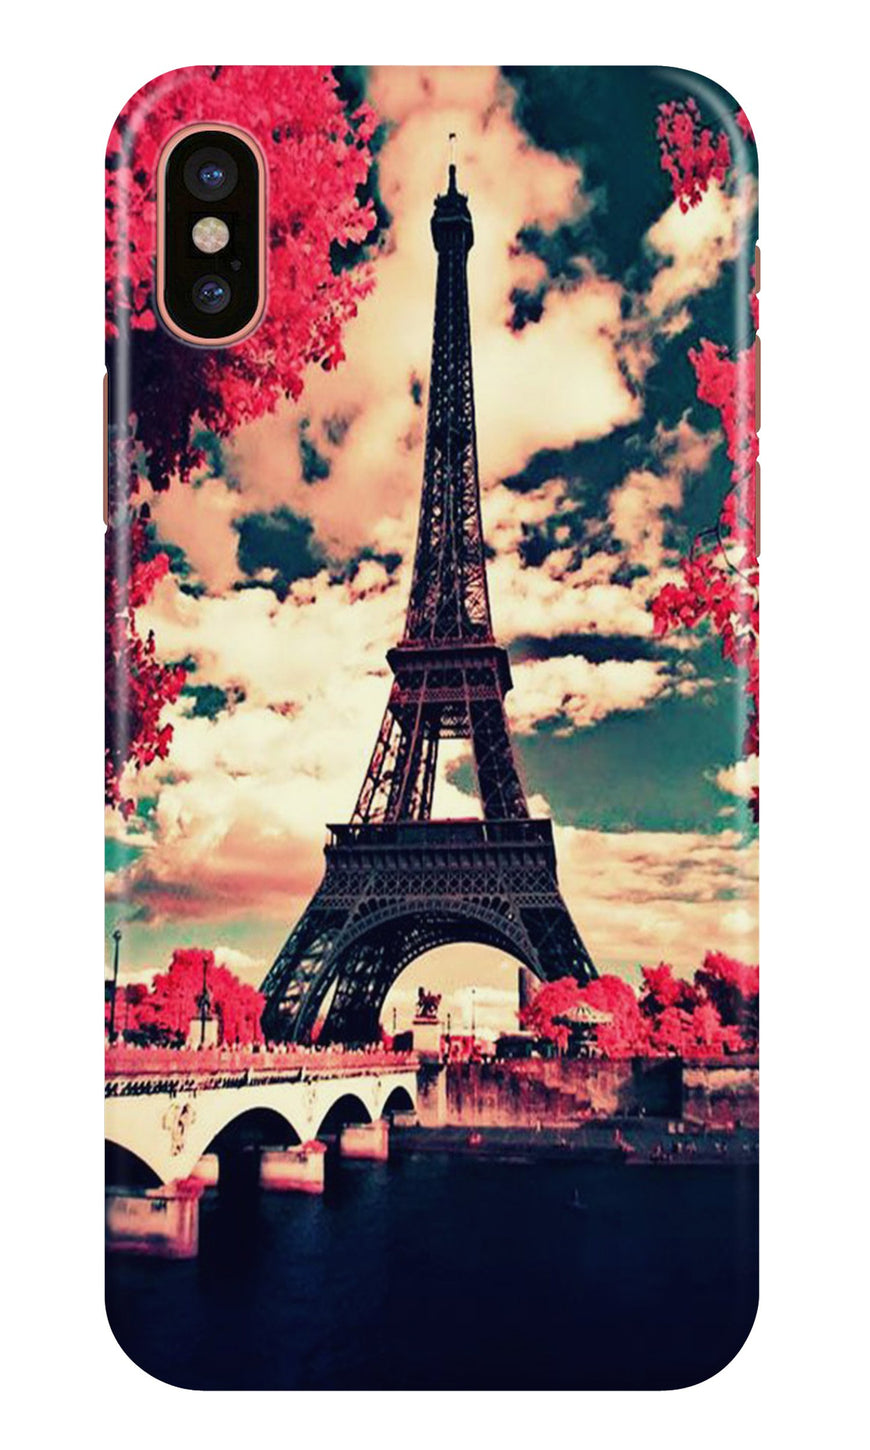 Eiffel Tower Case for iPhone Xs (Design No. 212)